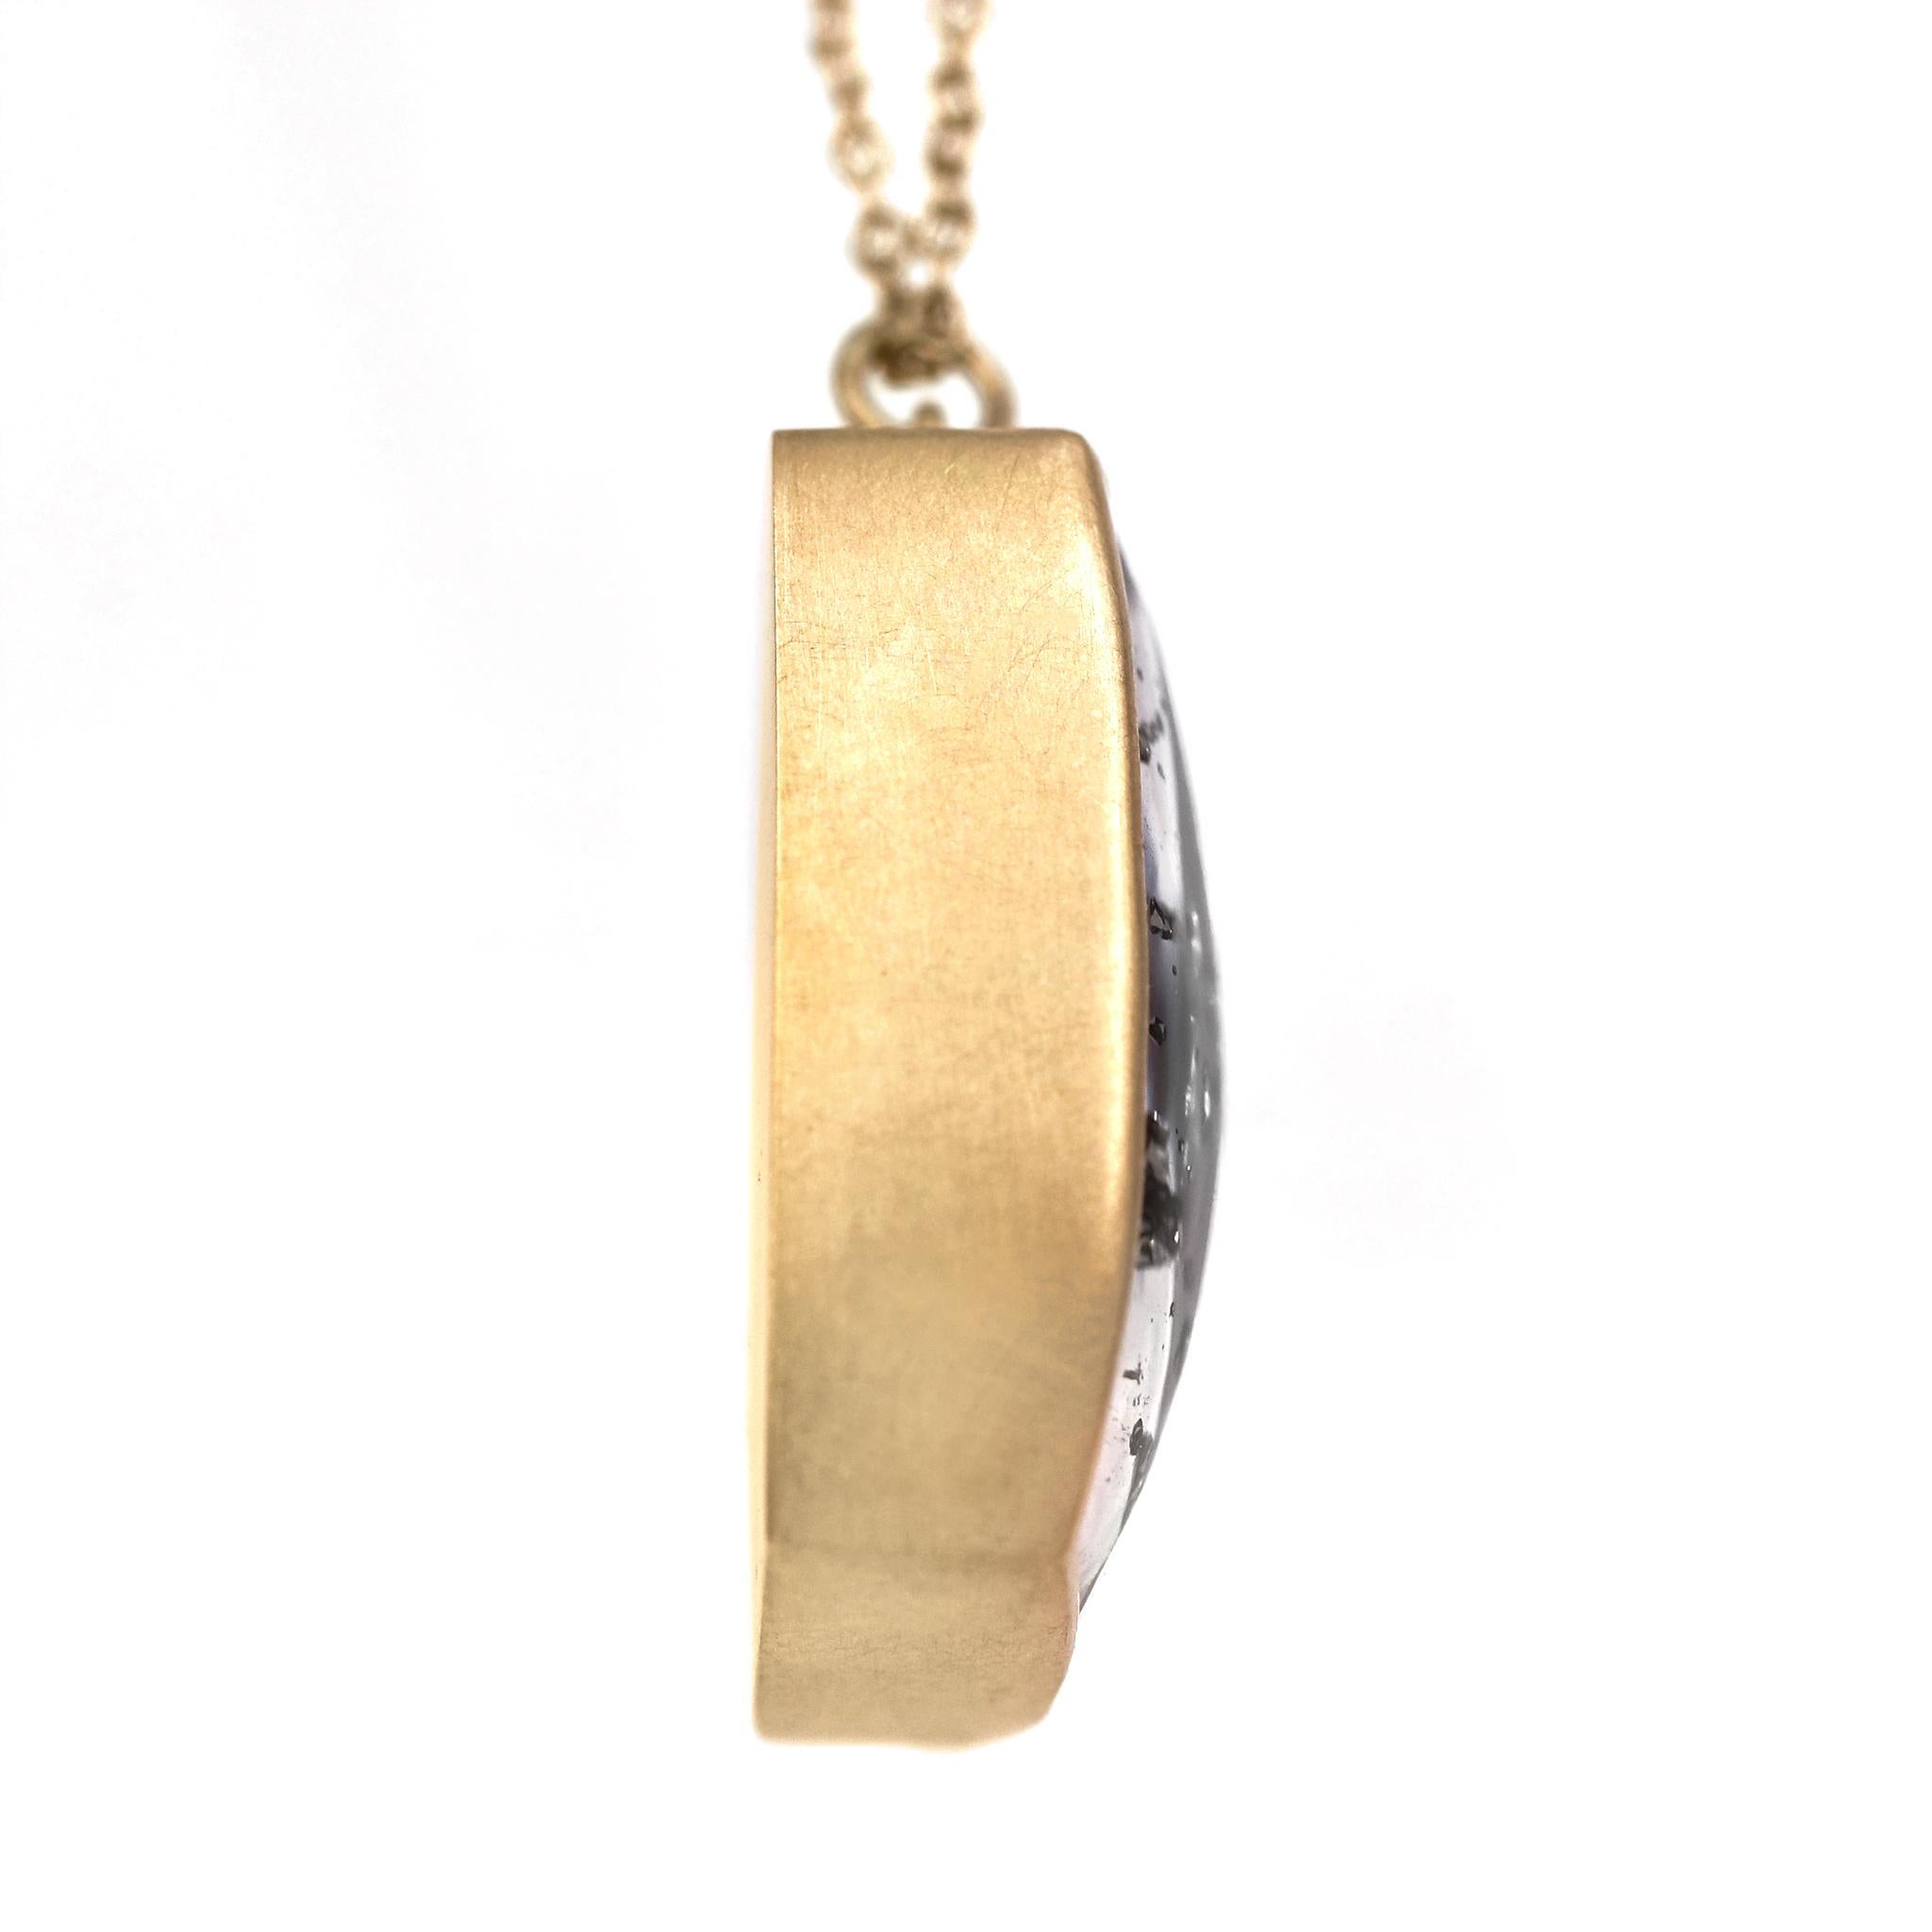 Artist 45.67 Carat Pyrite in Quartz Yellow Gold One of a Kind Necklace, Lola Brooks